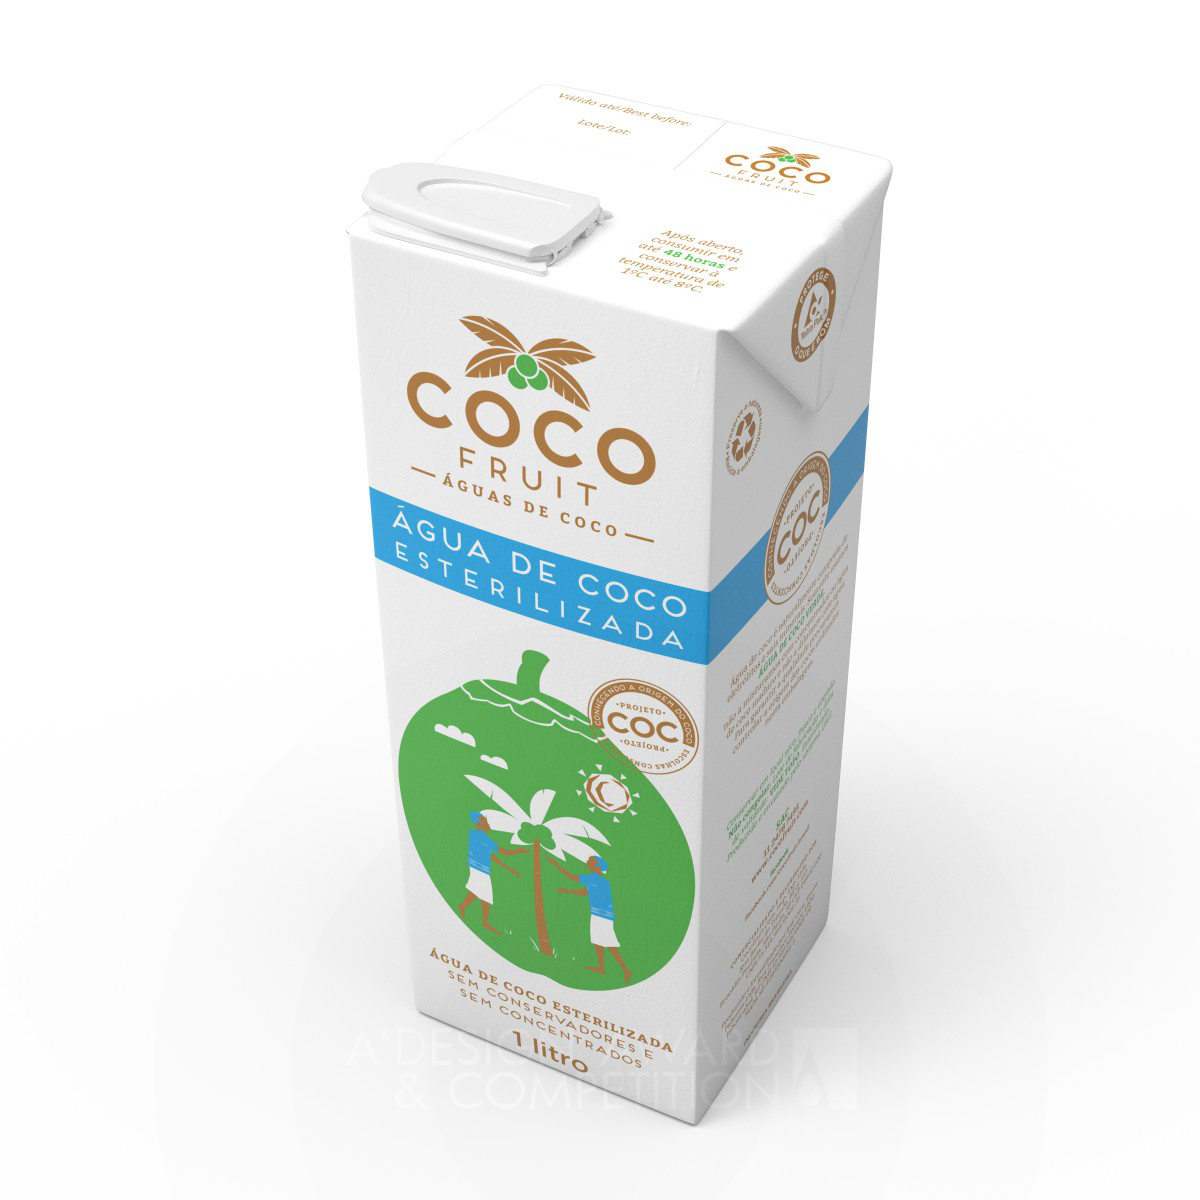 Coco Fruit Beverage Package by Taiam Ebert